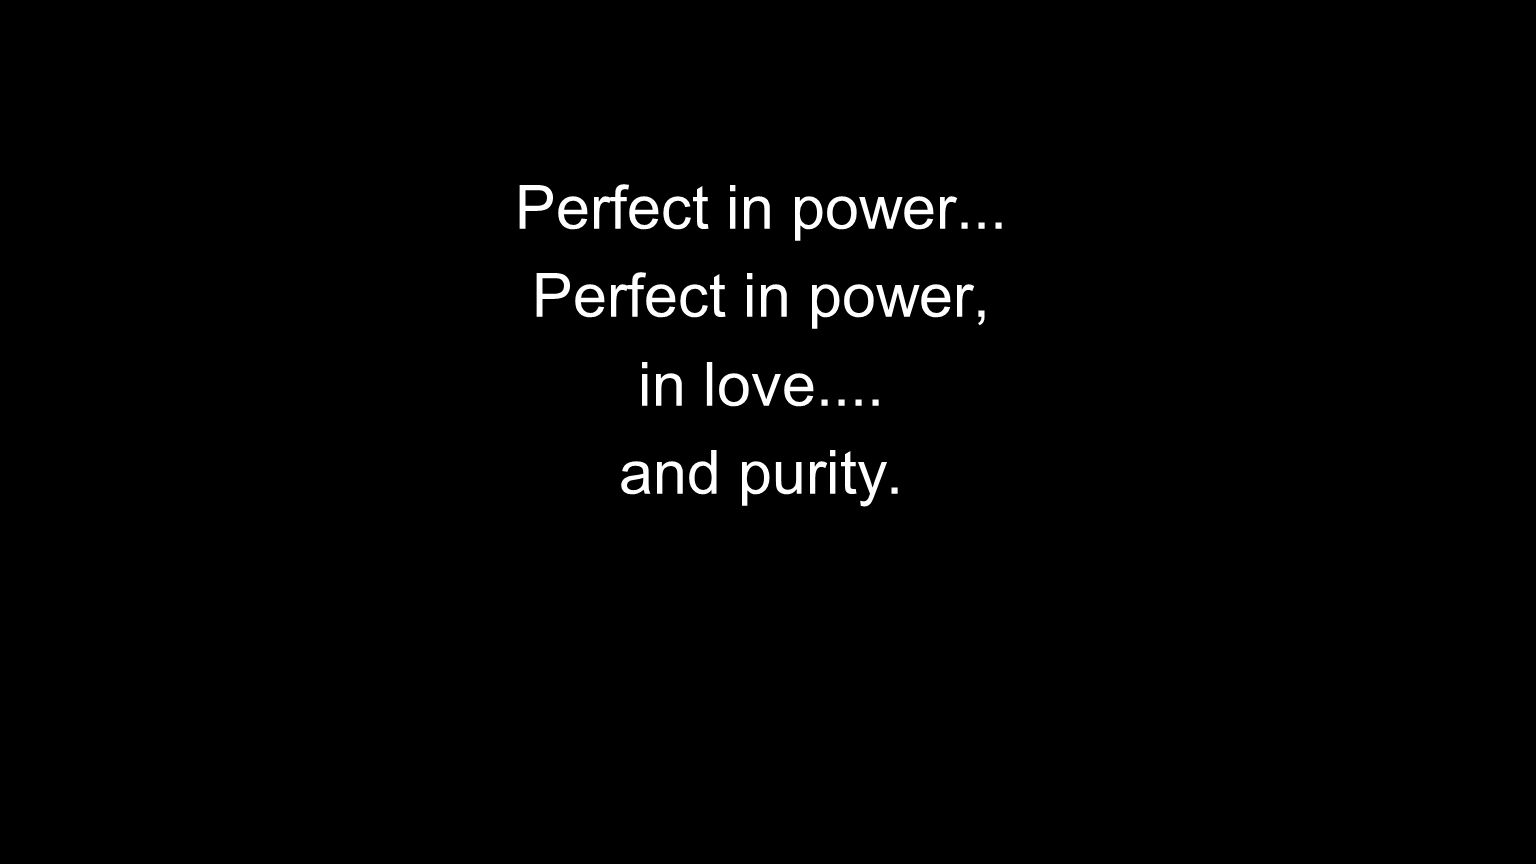 Perfect in power... Perfect in power, in love.... and purity.